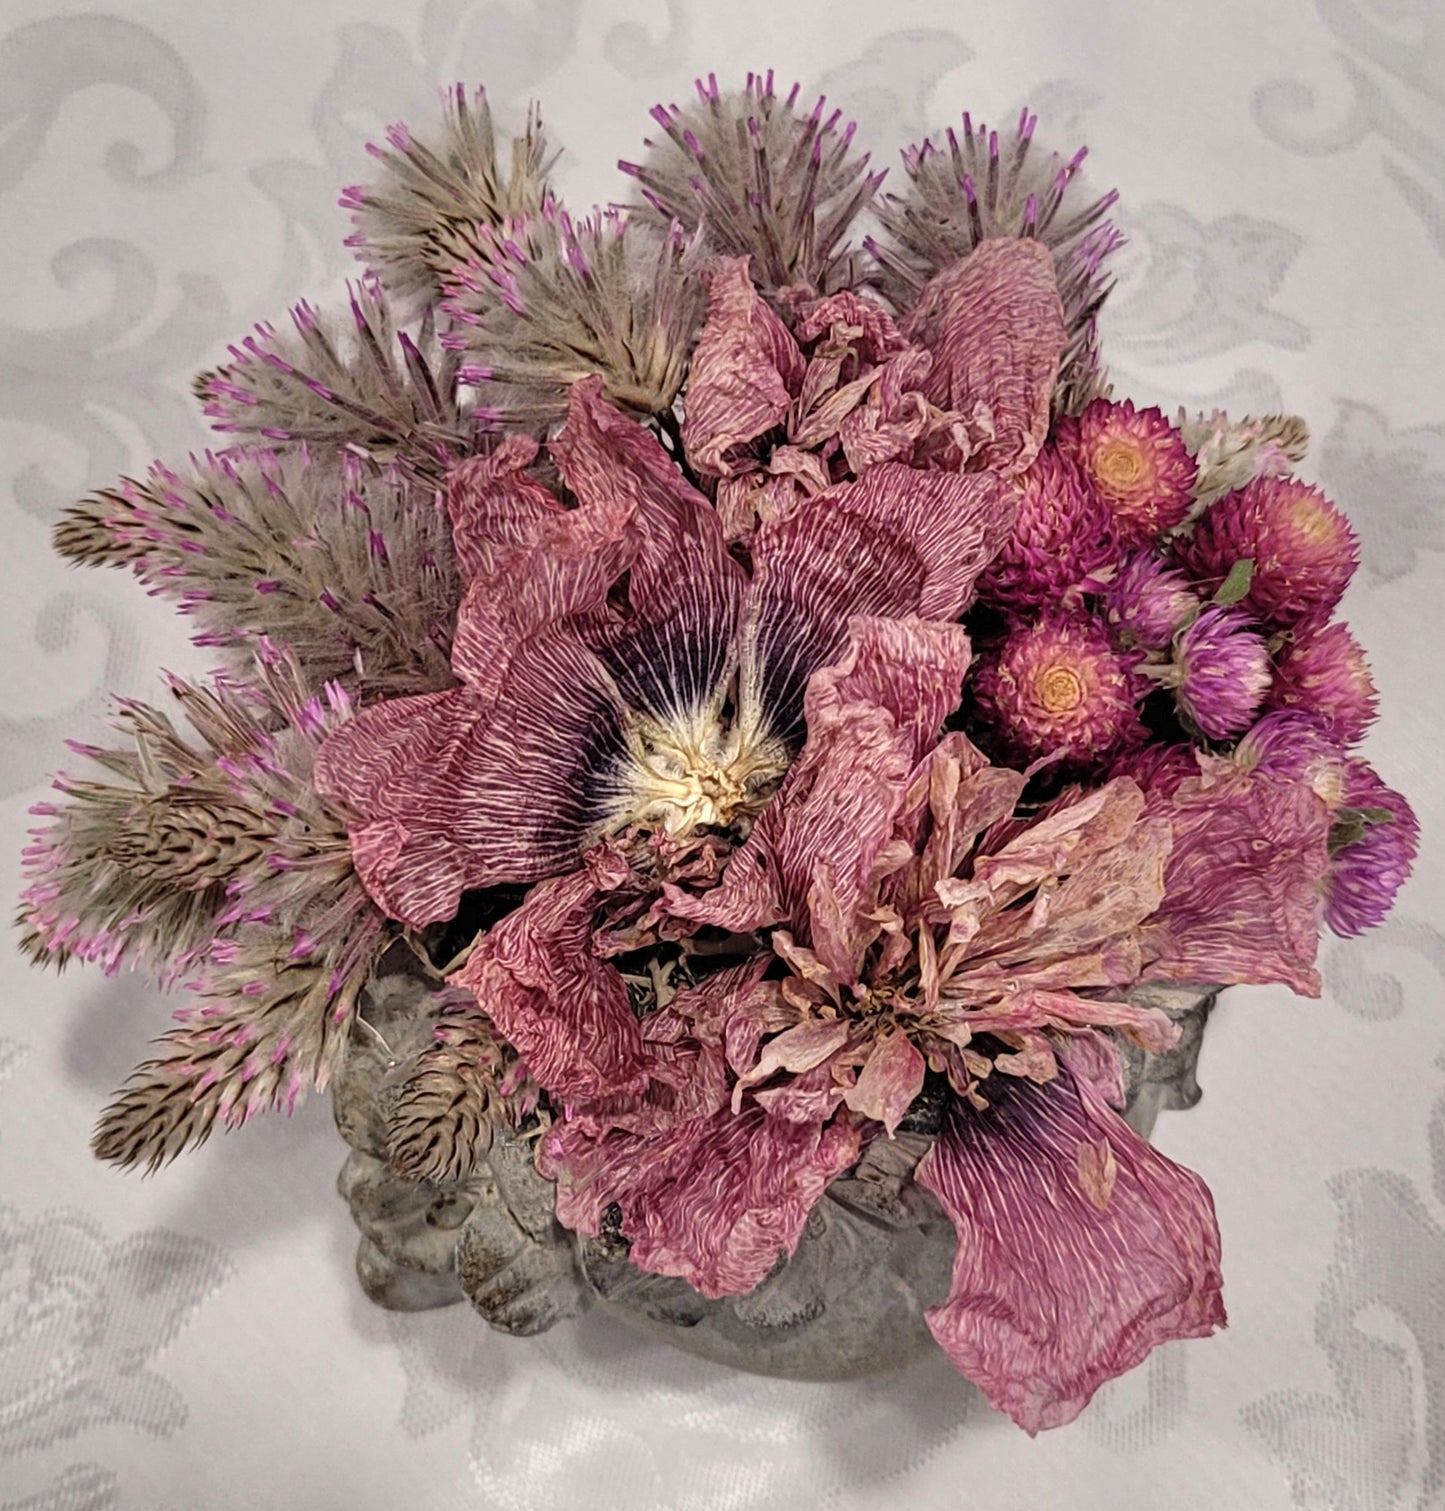 Dried Flowers in a ceramic vase